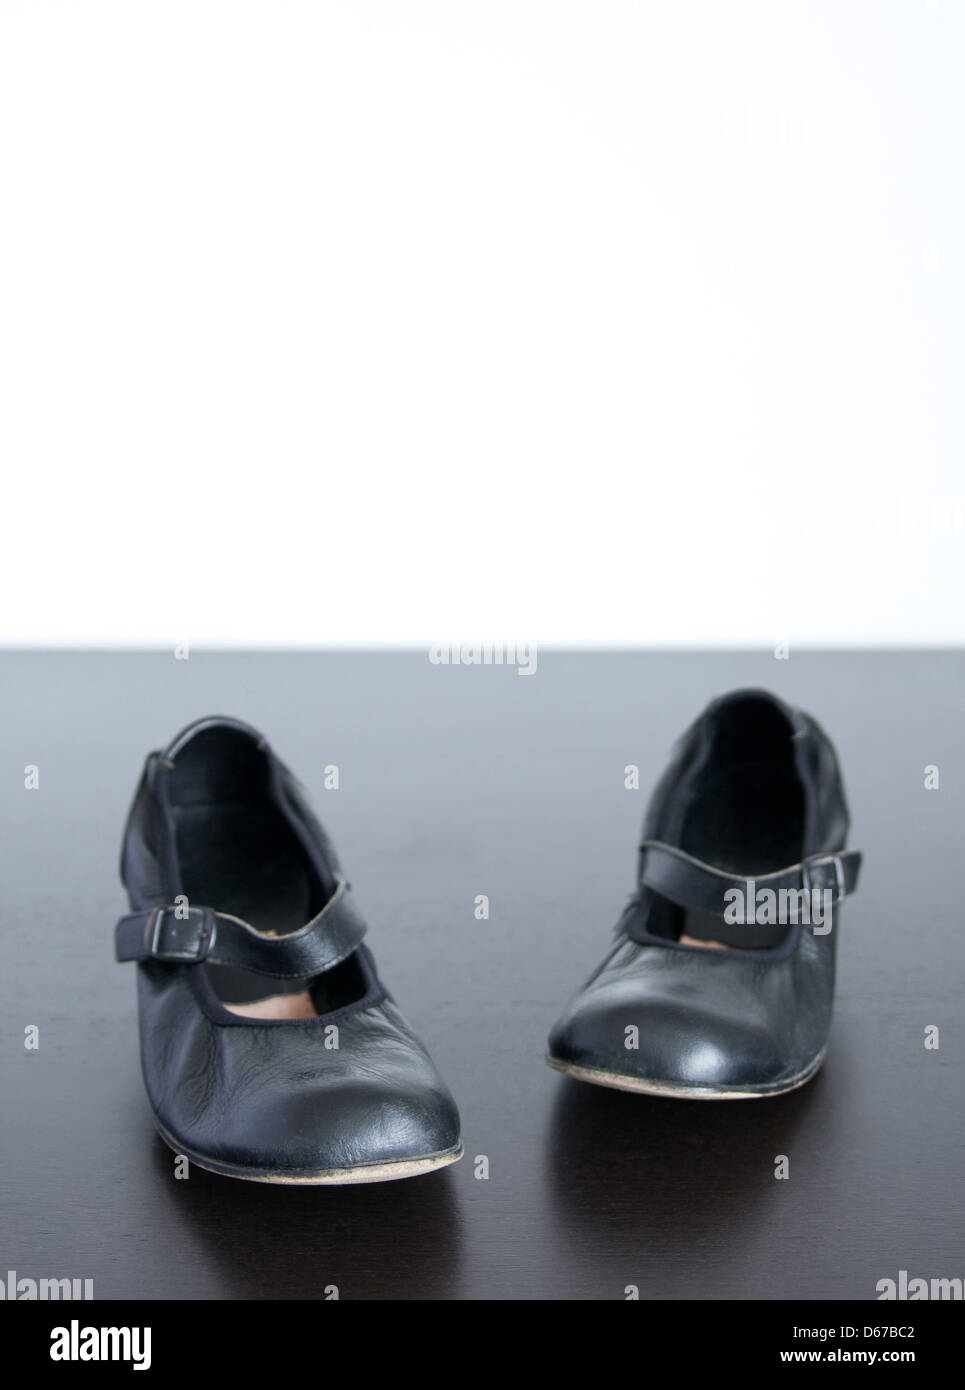 Black shoes on wooden surface, wish copy-space behind. Stock Photo